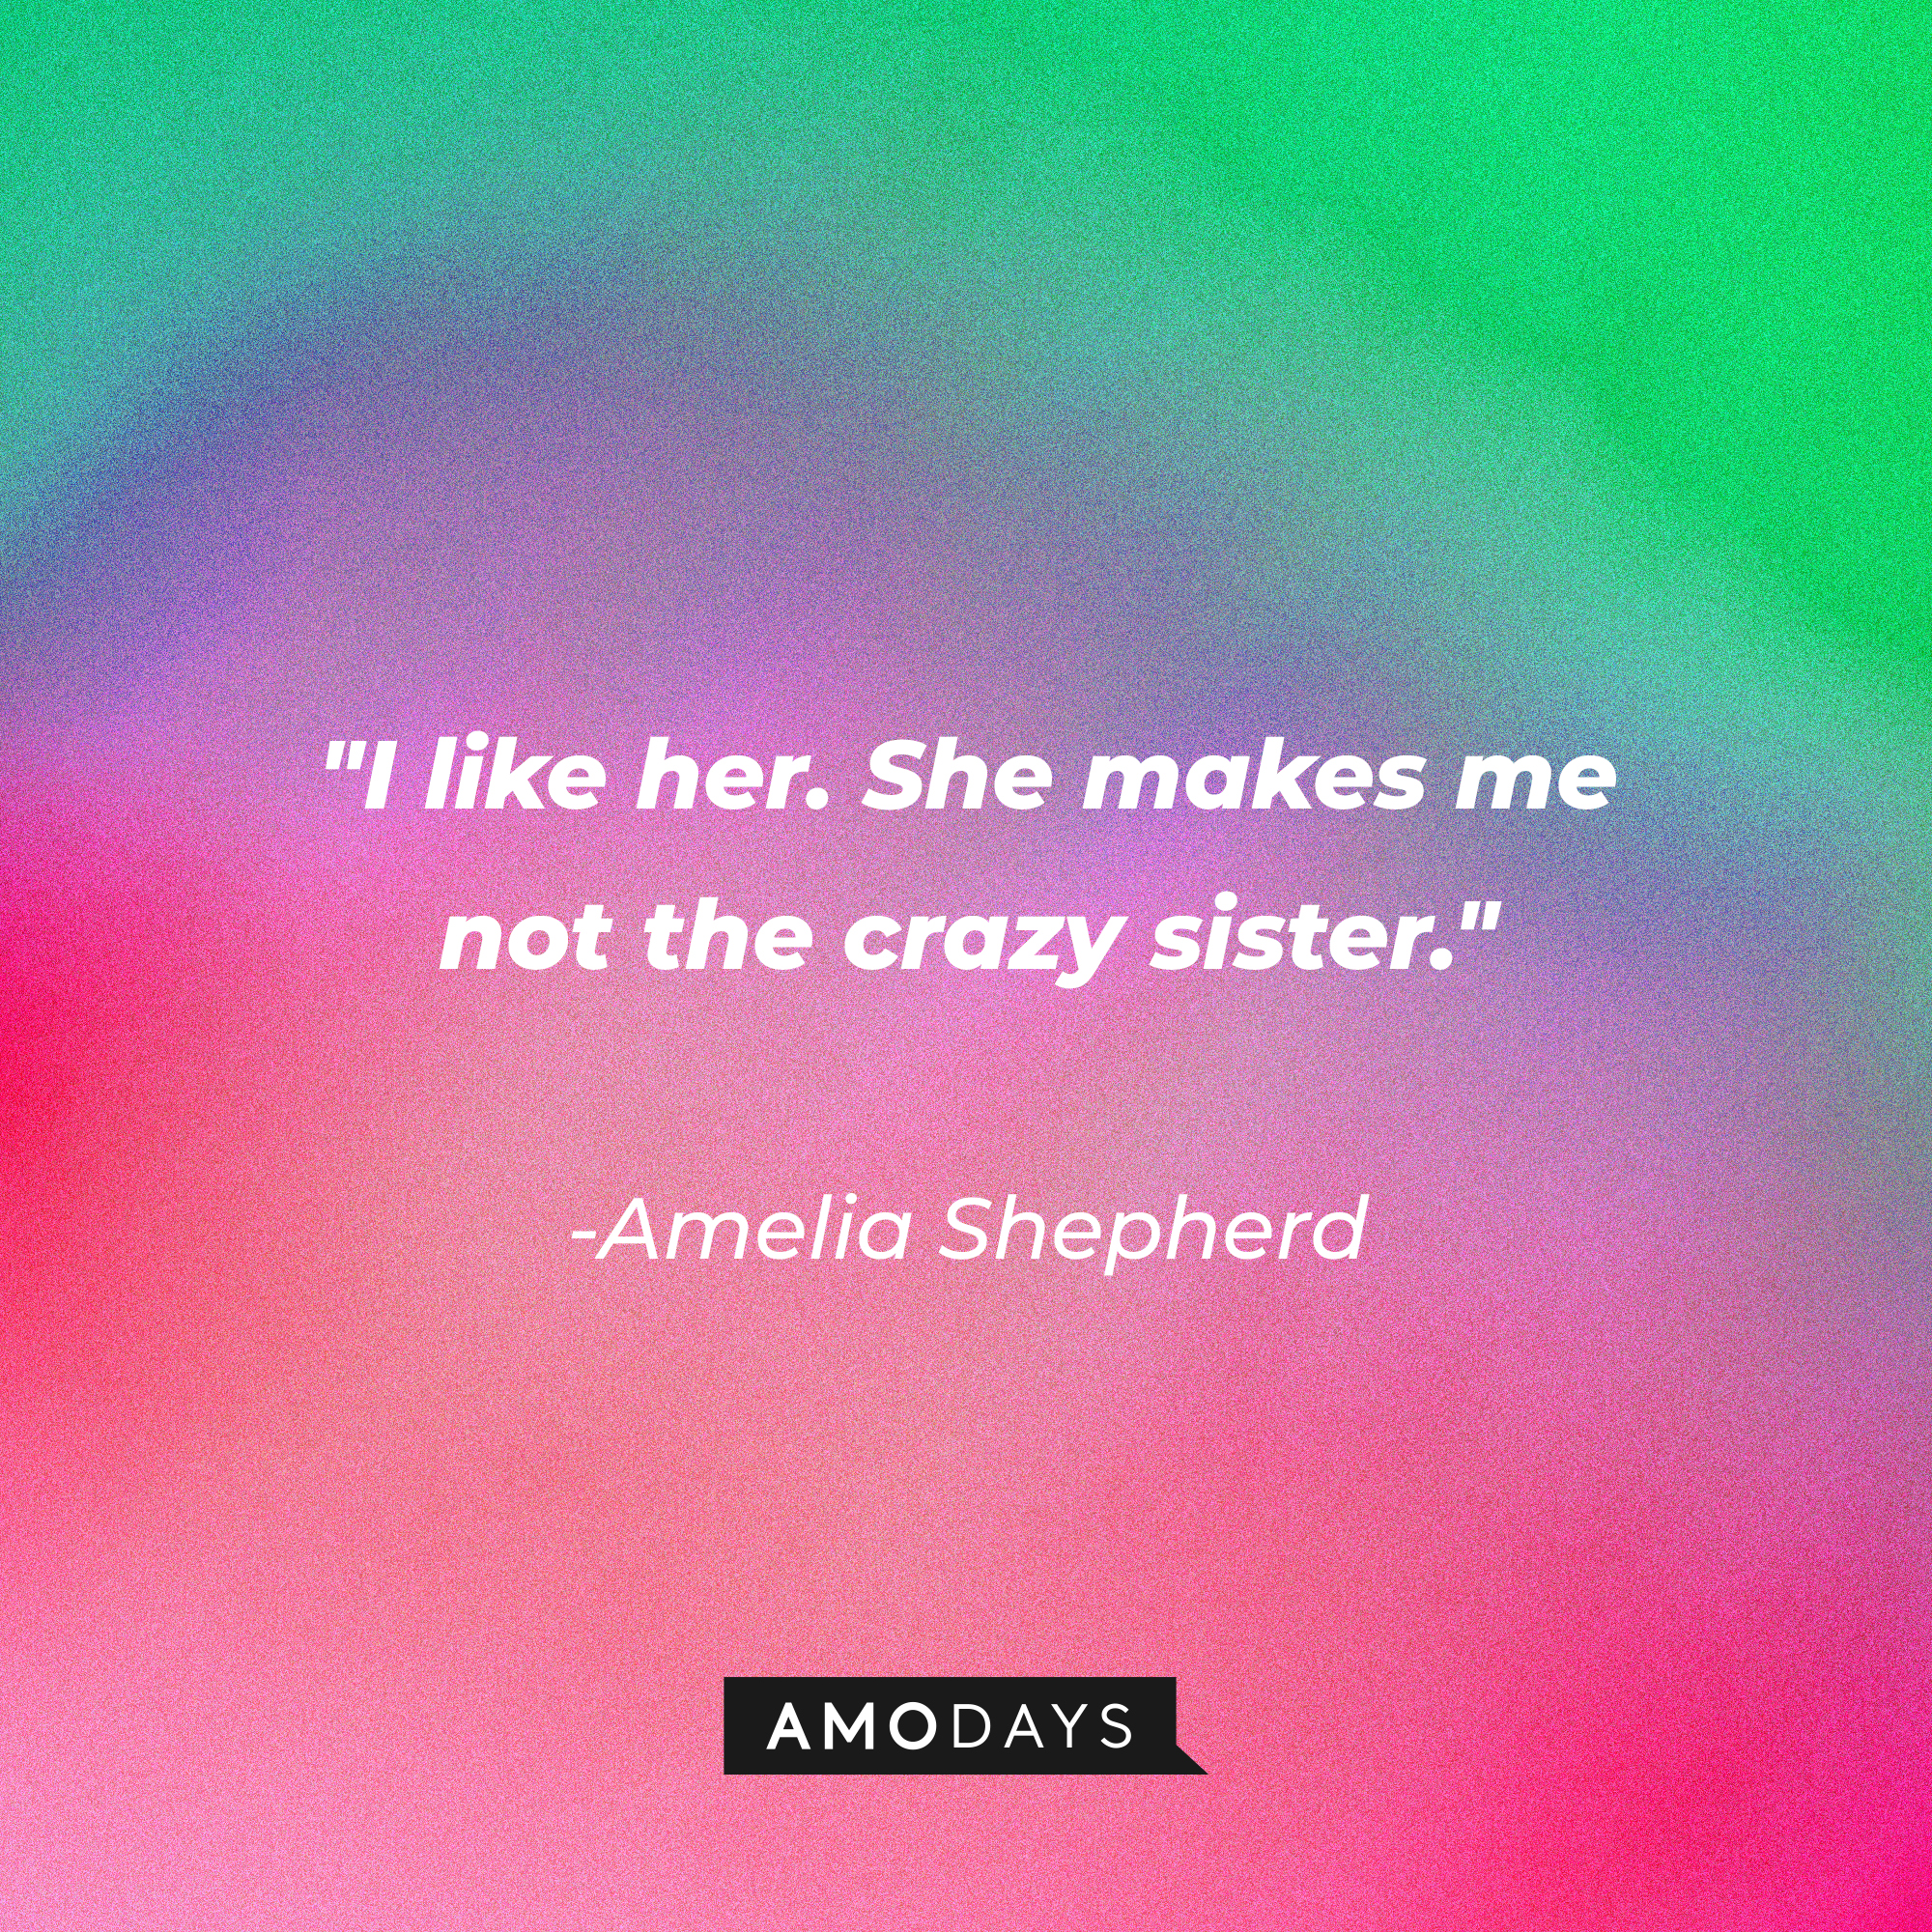 Amelia Shepherd's quote: "I like her. She makes me not the crazy sister." | Source: AmoDays